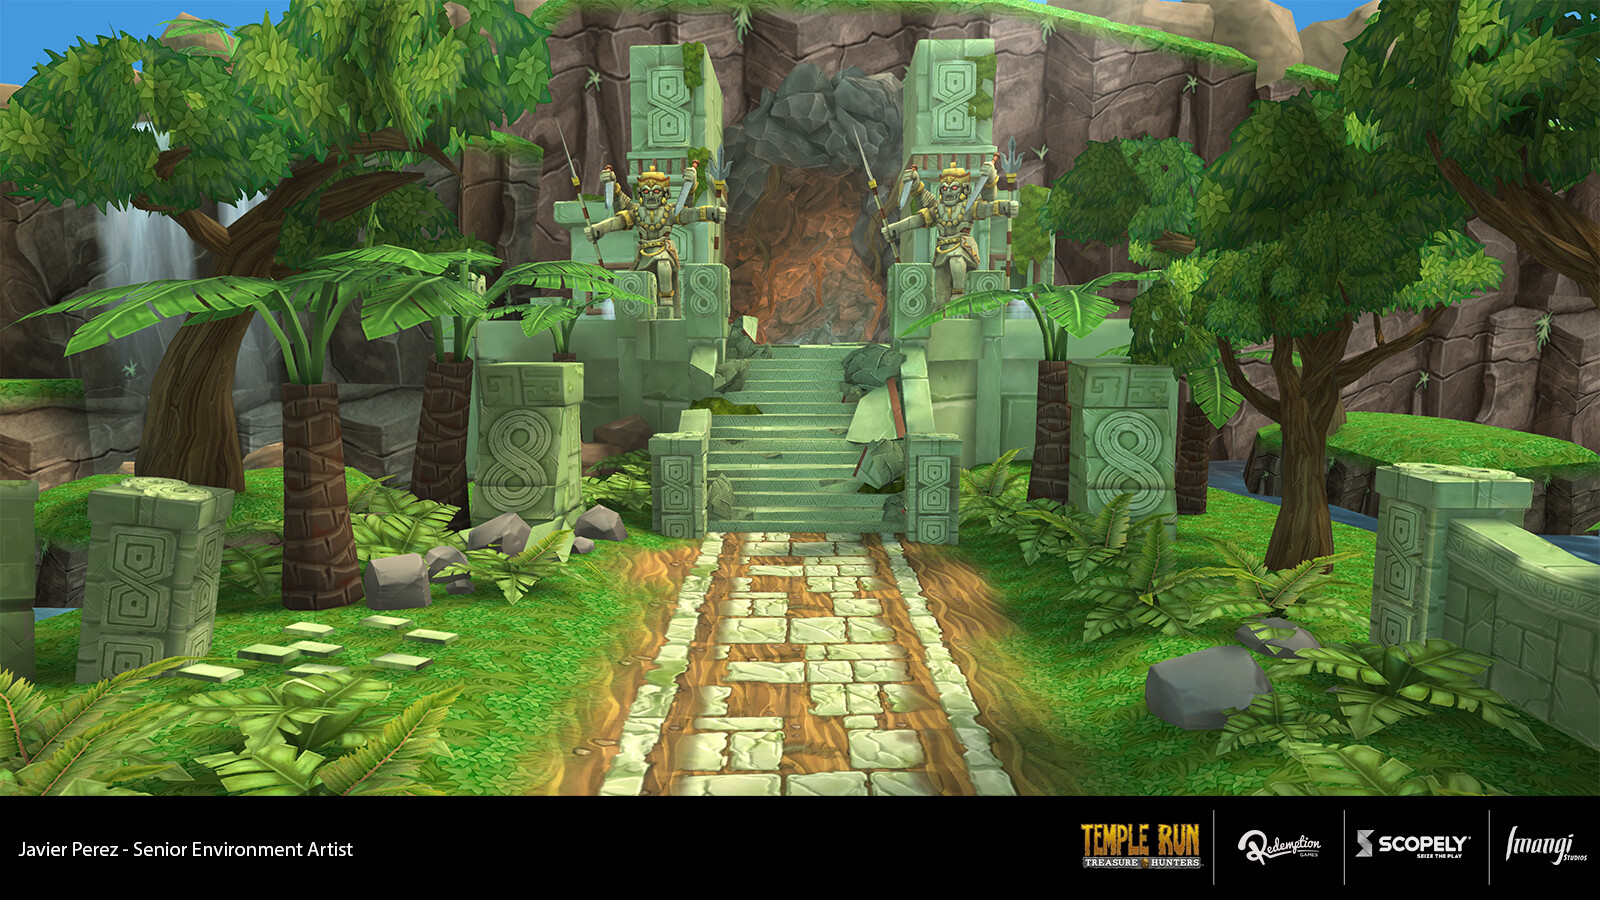 temple run unblocked at school Archives - MOBSEAR Gallery